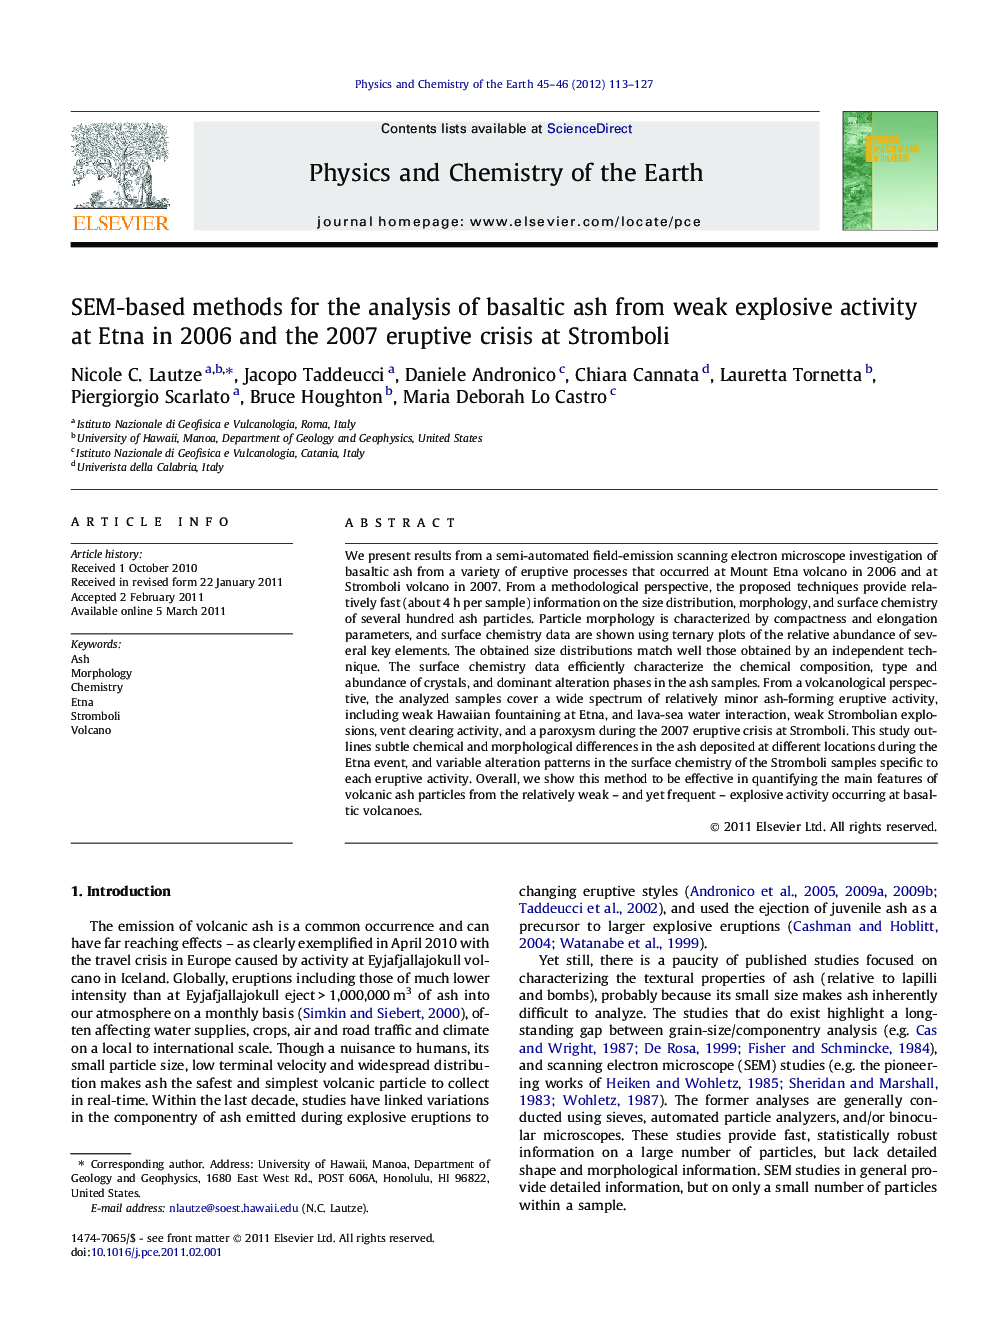 SEM-based methods for the analysis of basaltic ash from weak explosive activity at Etna in 2006 and the 2007 eruptive crisis at Stromboli